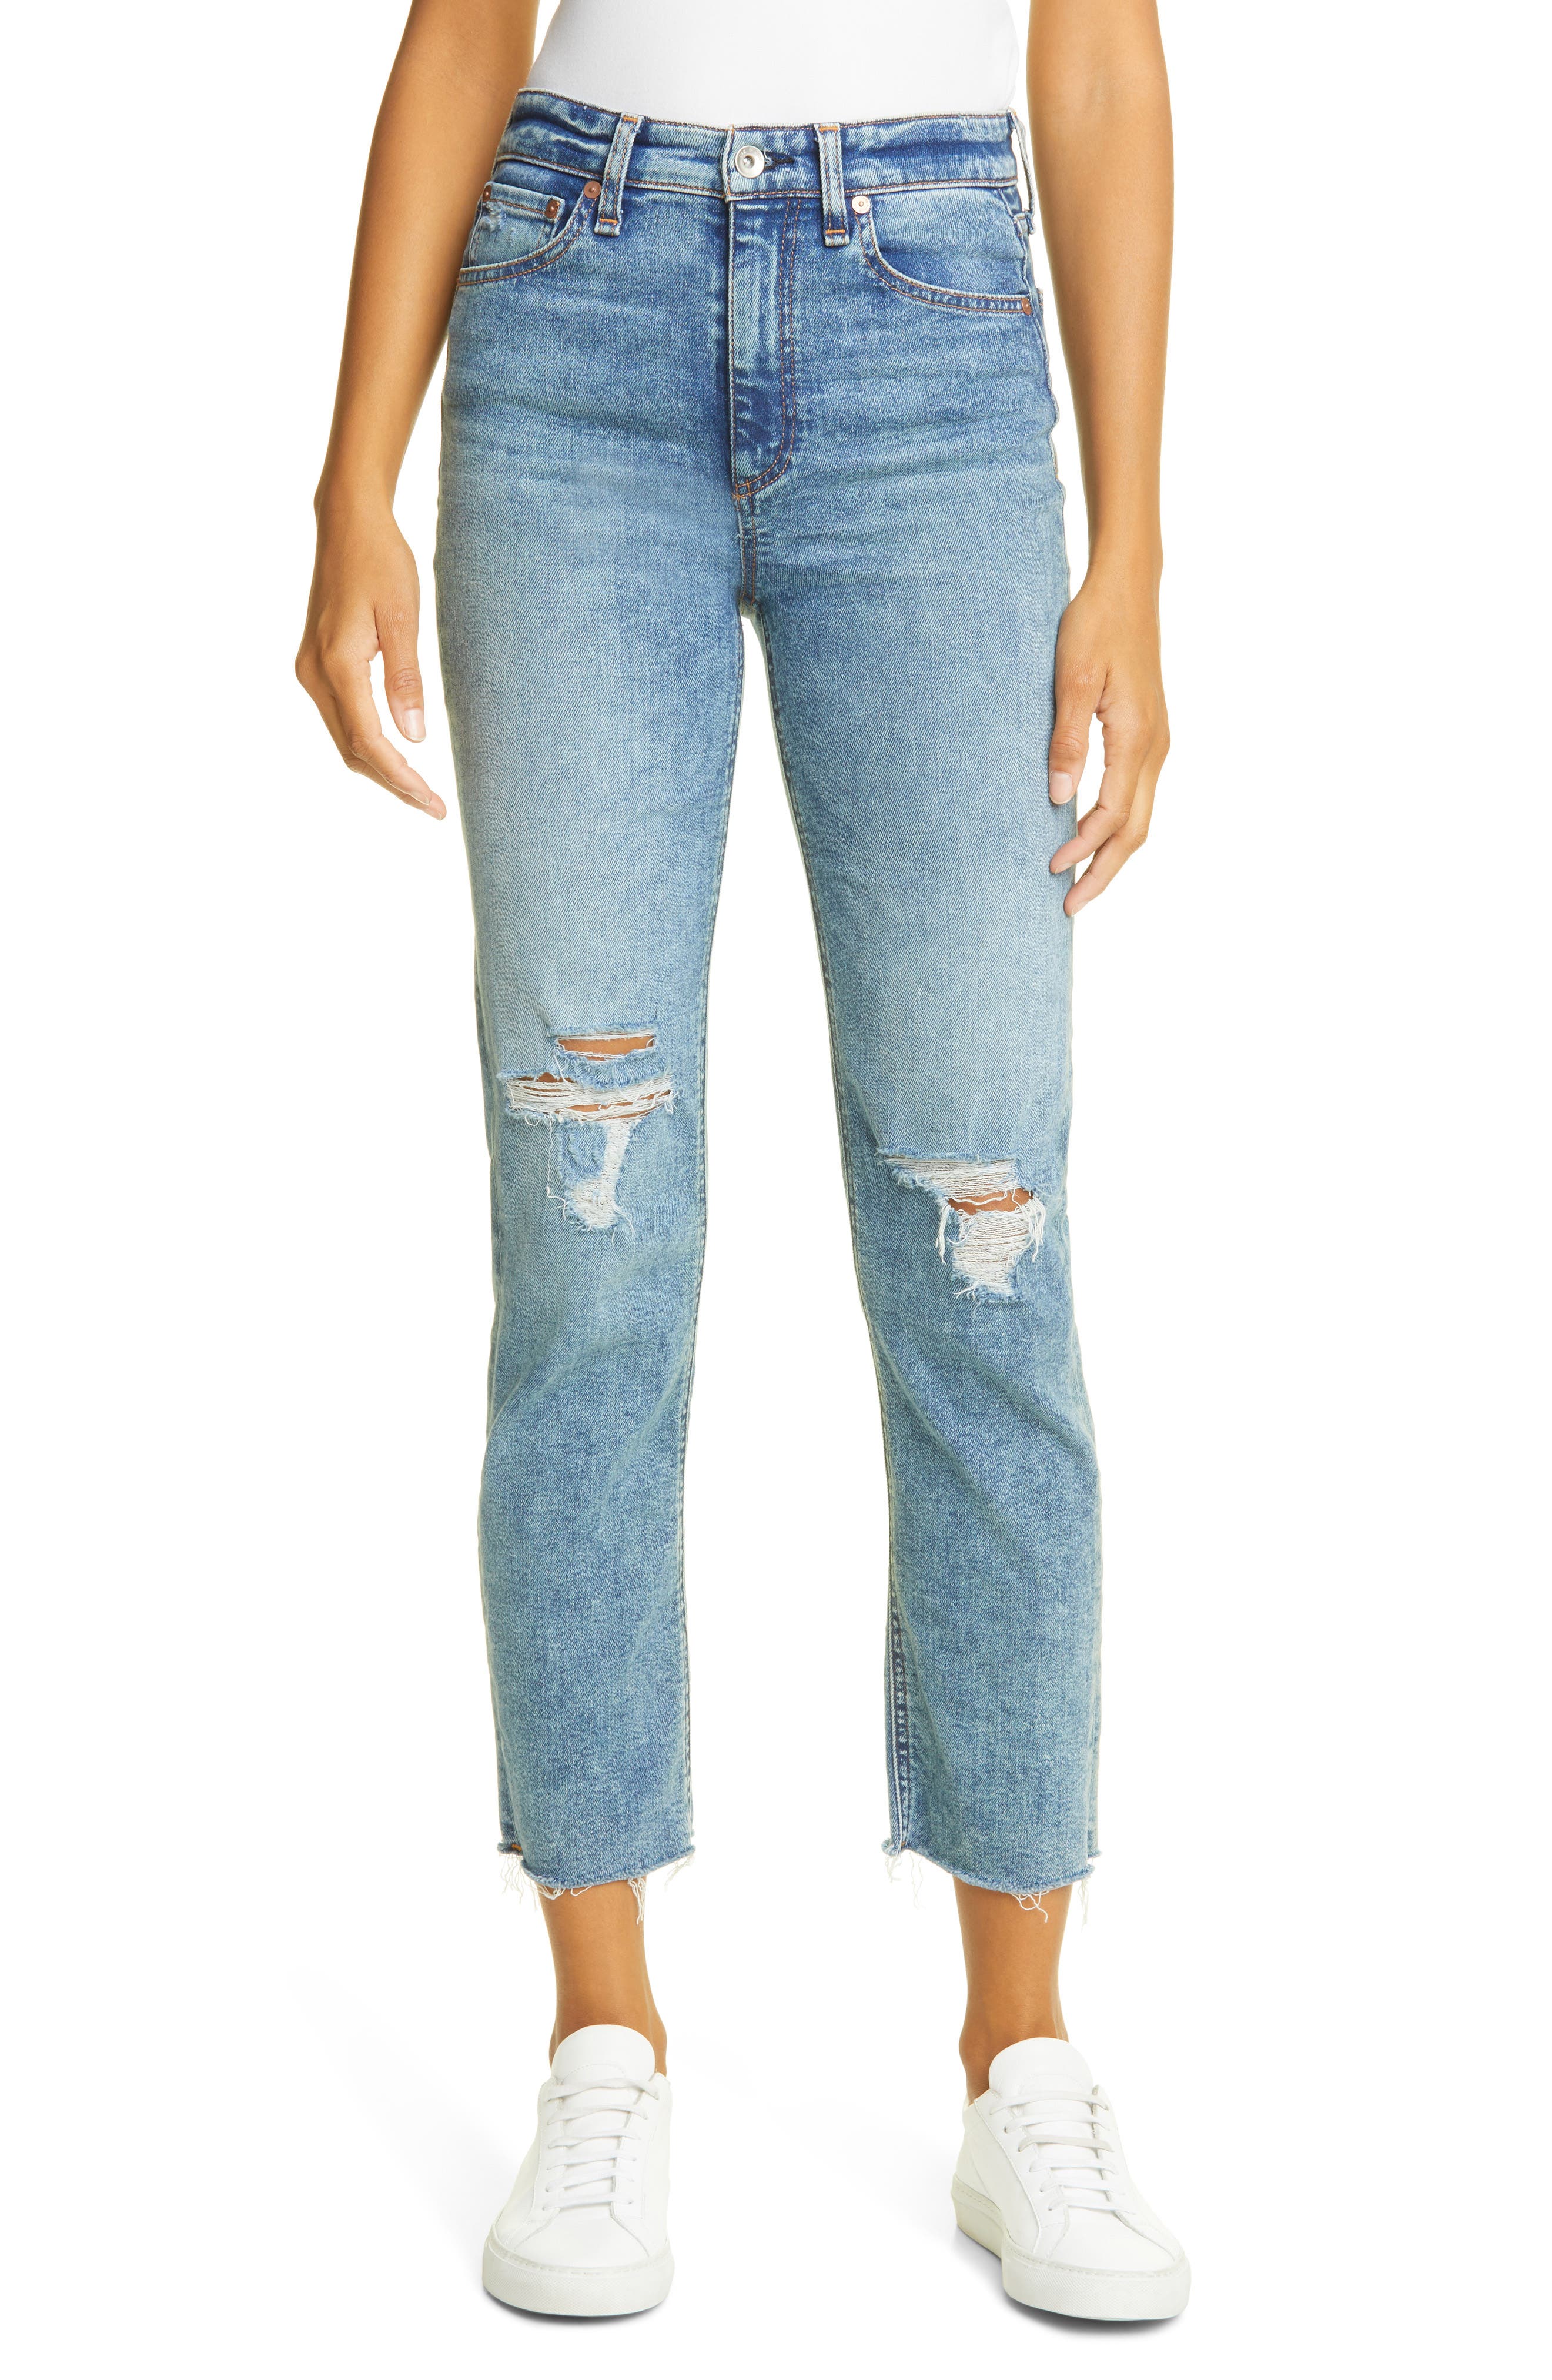 rag & bone/Jean The Skinny Distressed Jeans in Soft Rock with Holes Faded Black 28 